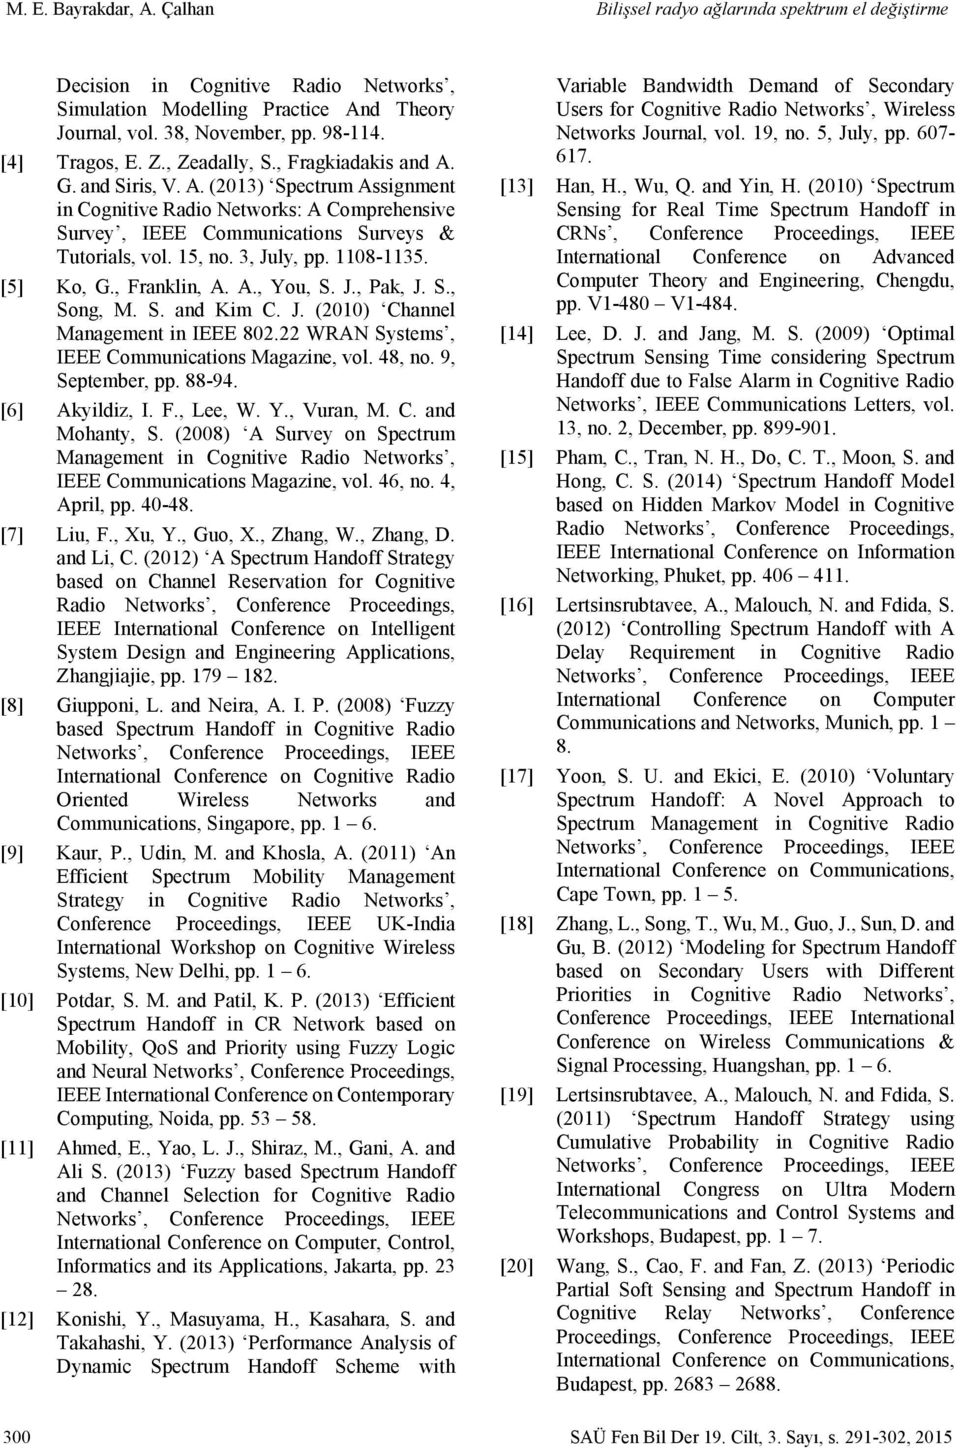 15, no. 3, July, pp. 1108-1135. [5] Ko, G., Franklin, A. A., You, S. J., Pak, J. S., Song, M. S. and Kim C. J. (2010) Channel Management in IEEE 802.22 WRAN Systems, IEEE Communications Magazine, vol.